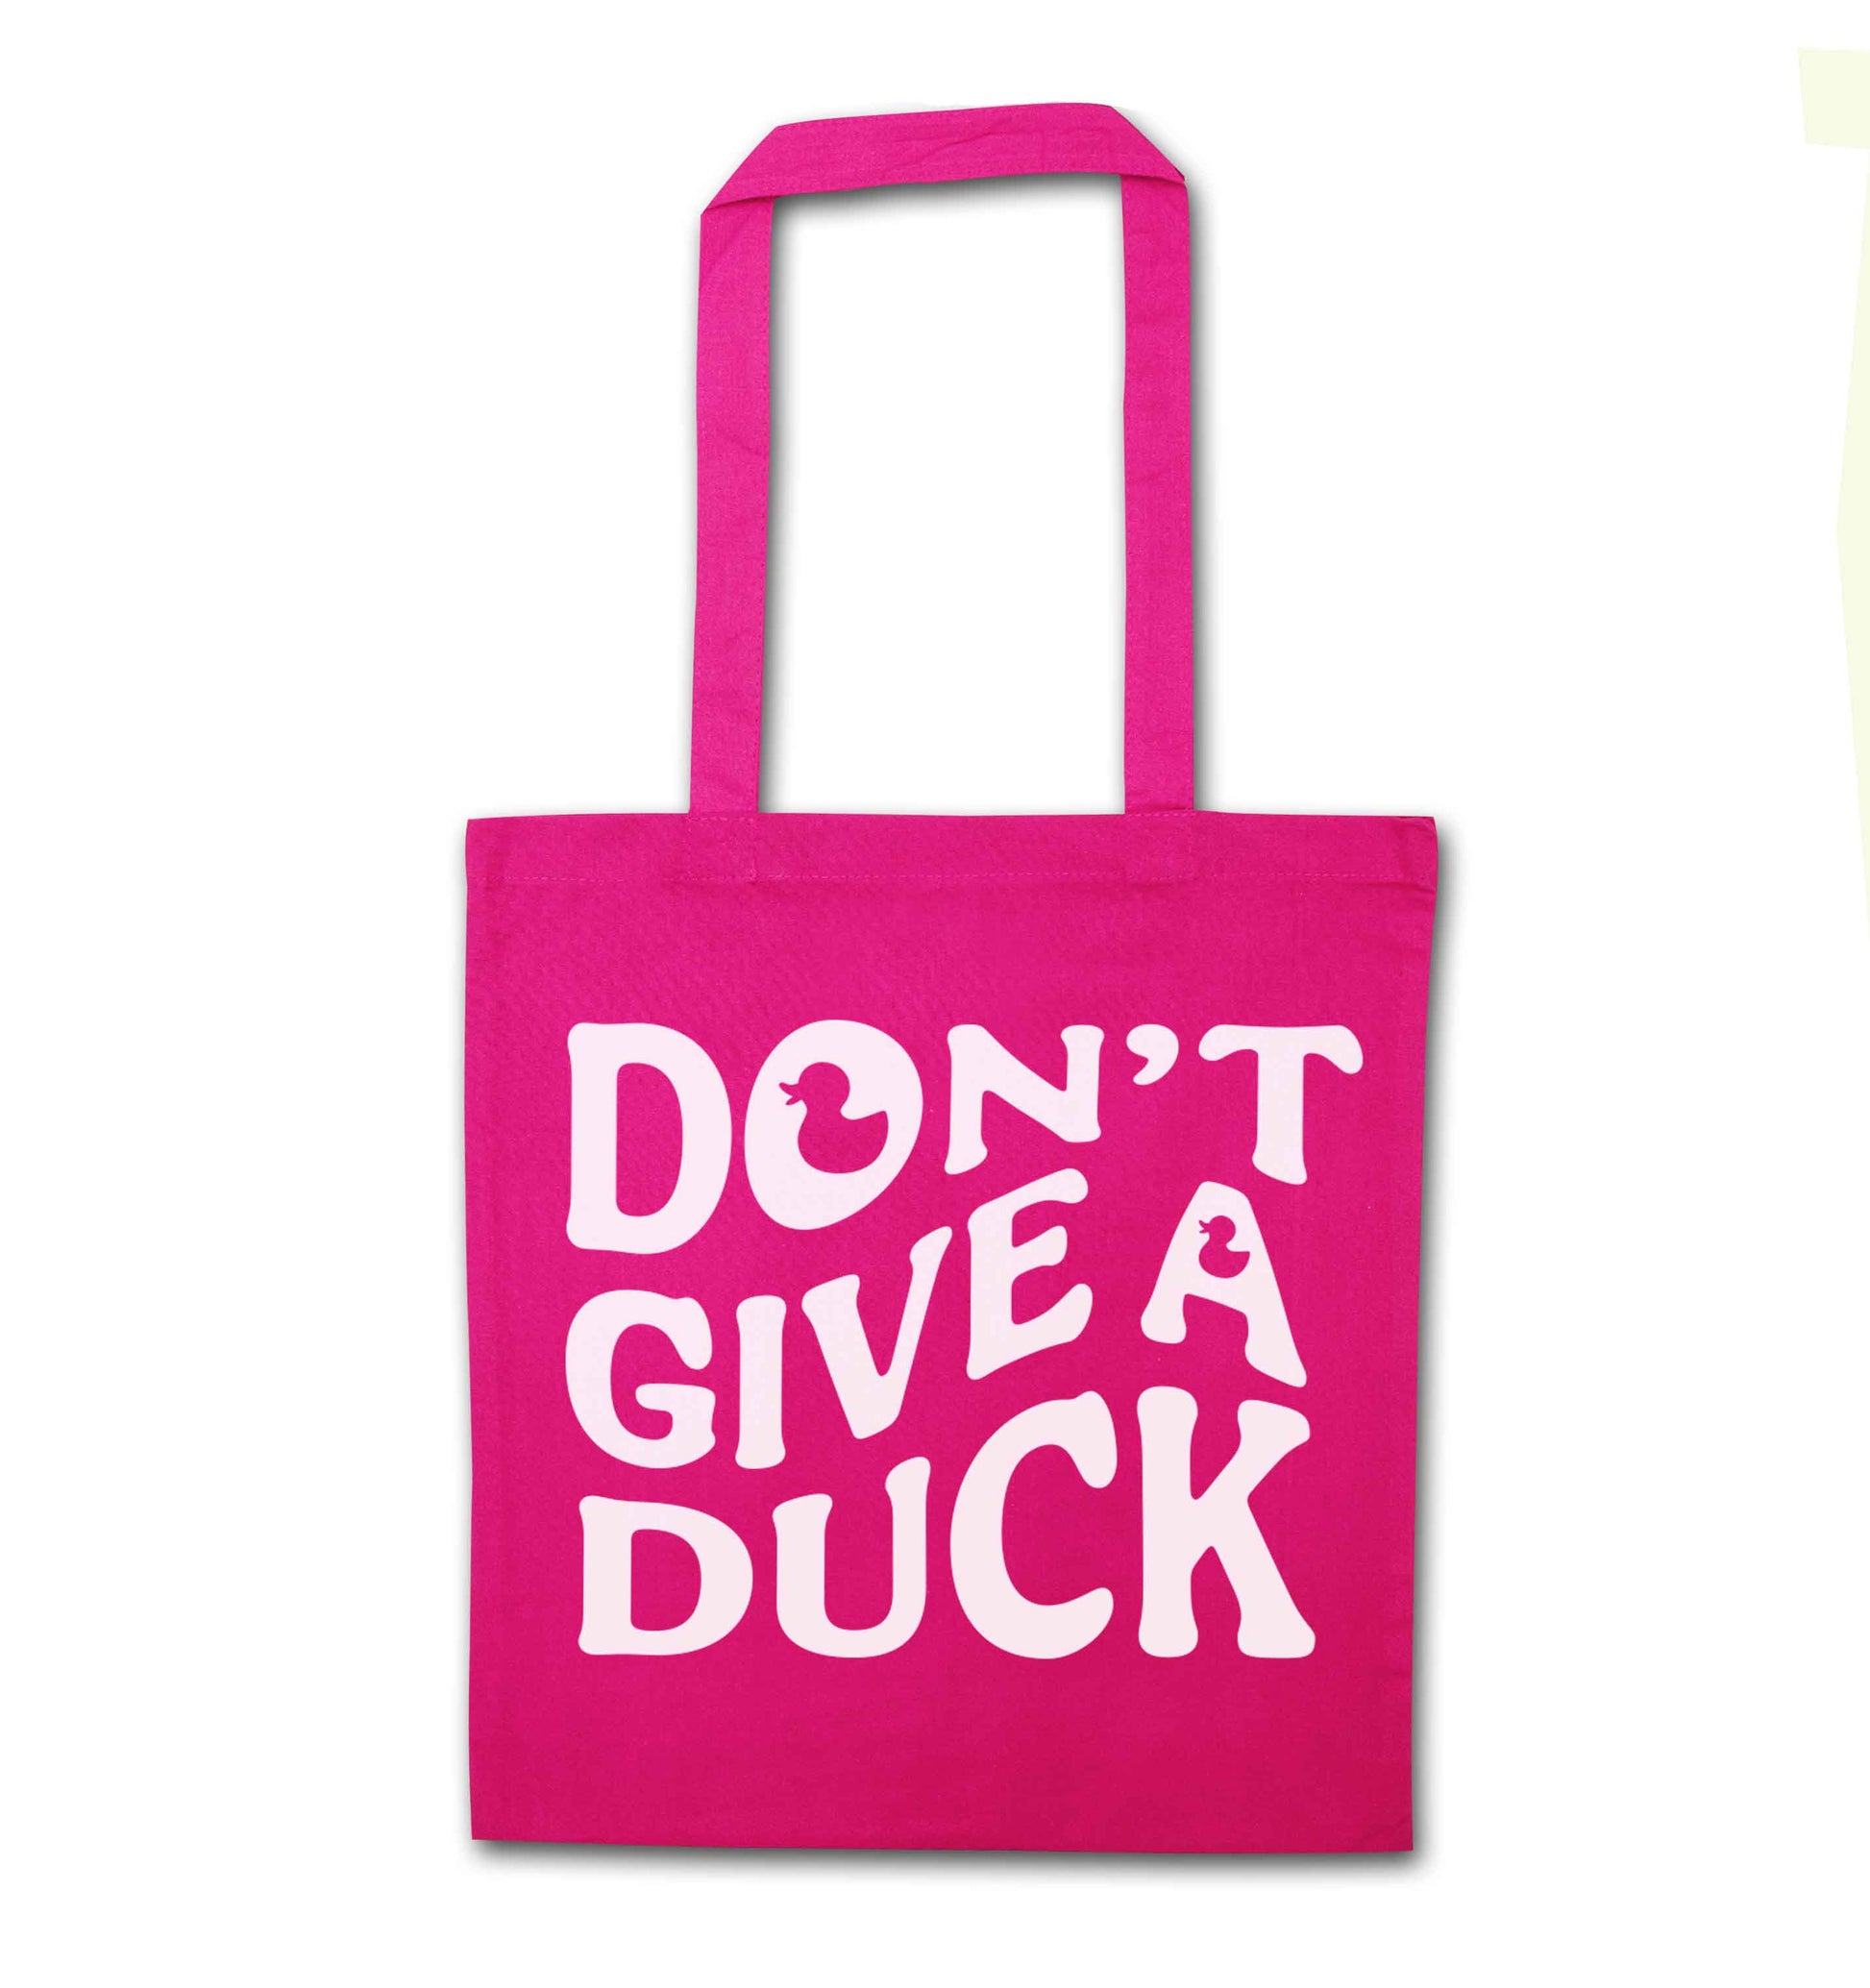 Don't give a duck pink tote bag